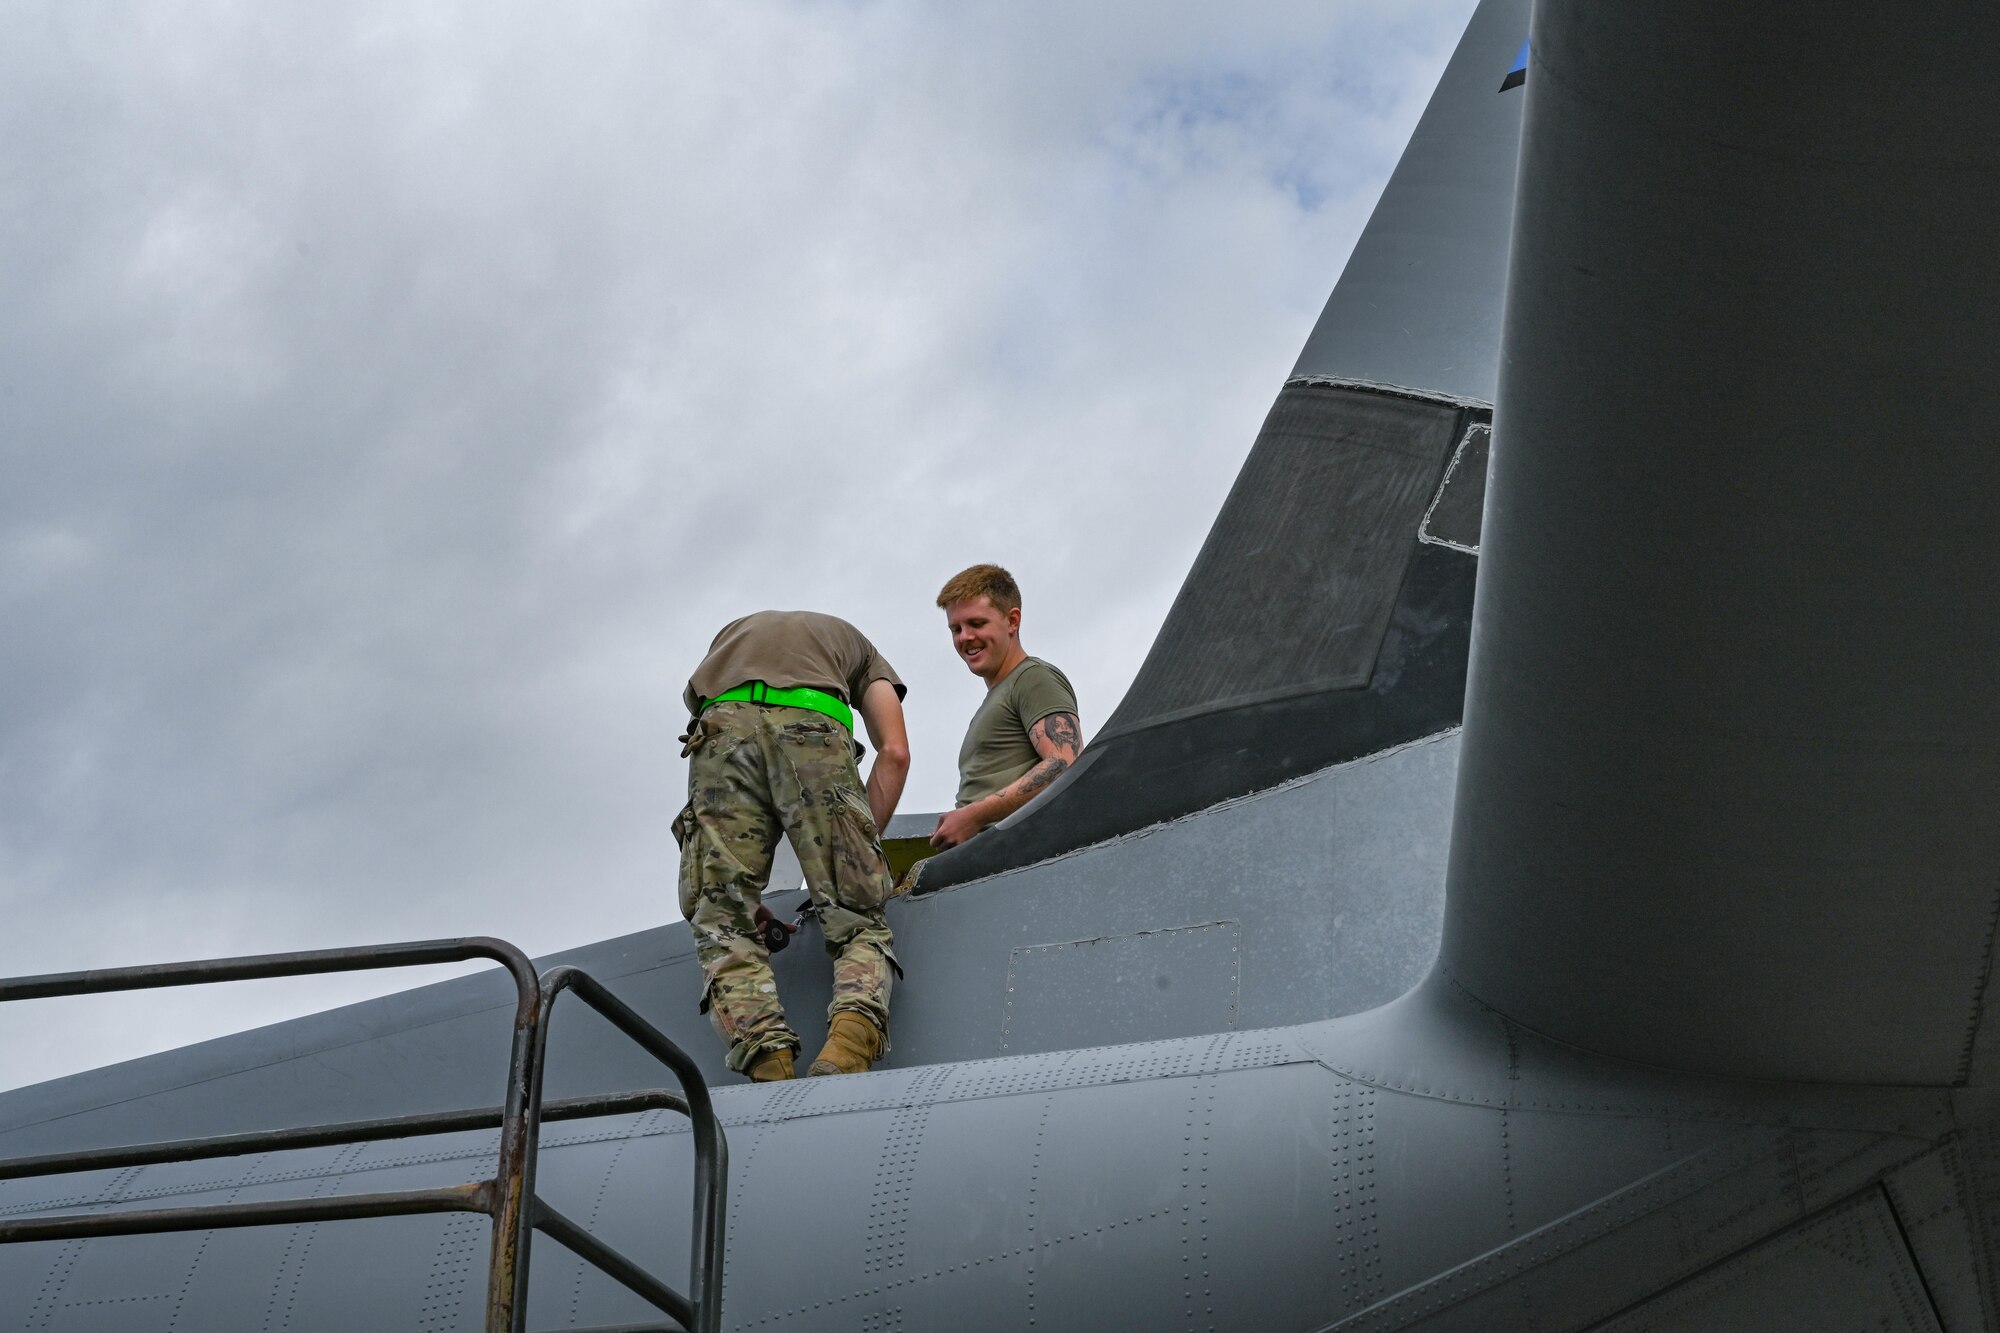 Airman stand on top of aircraft.